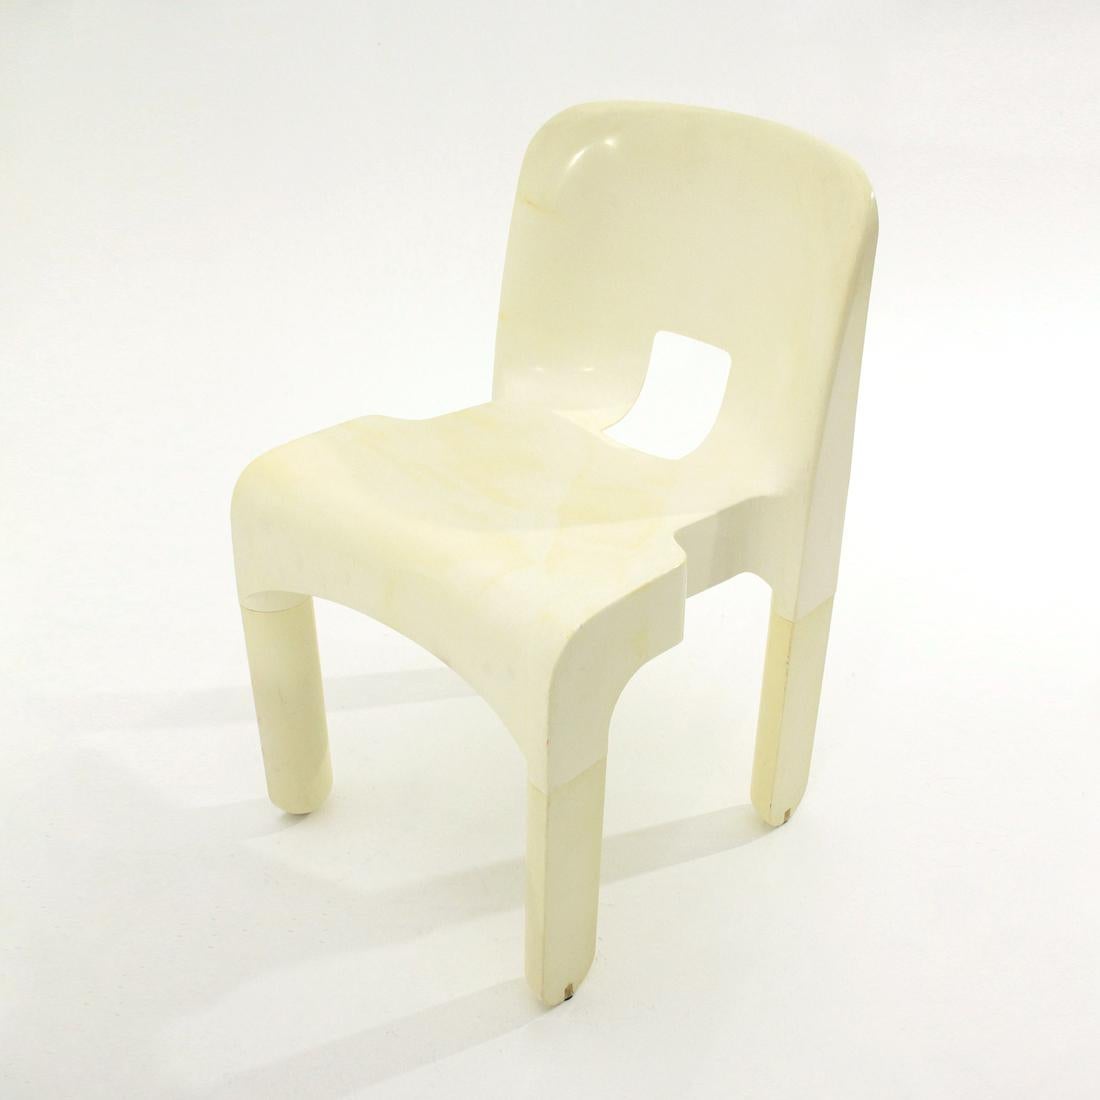 6 “4860” Chairs in White Plastic by Joe Colombo for Kartell, 1960s 2